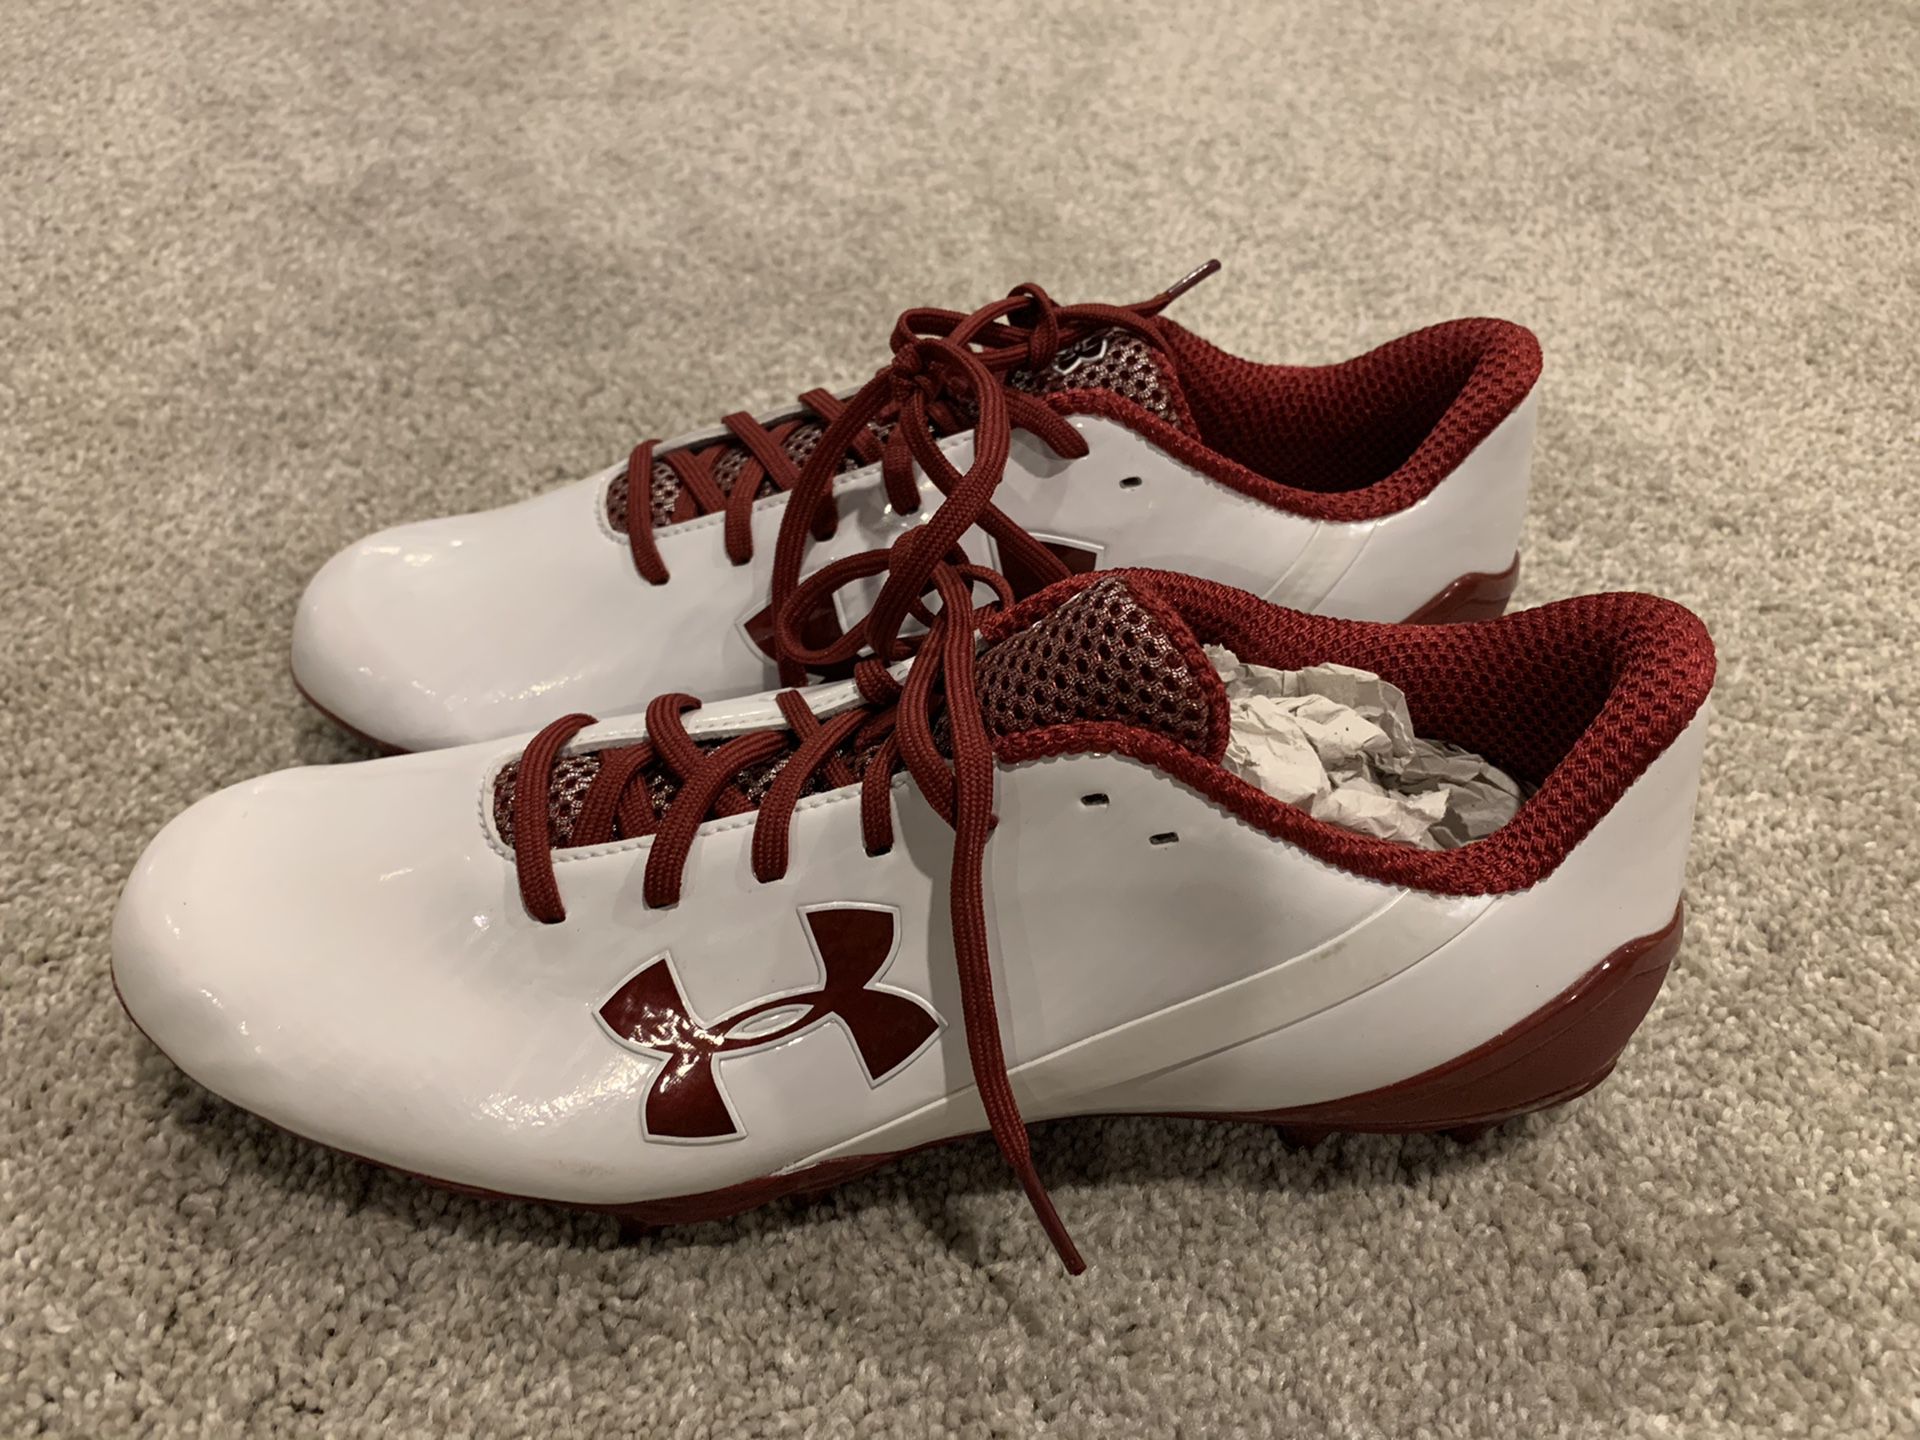 White/red Under Armour cleats size 11